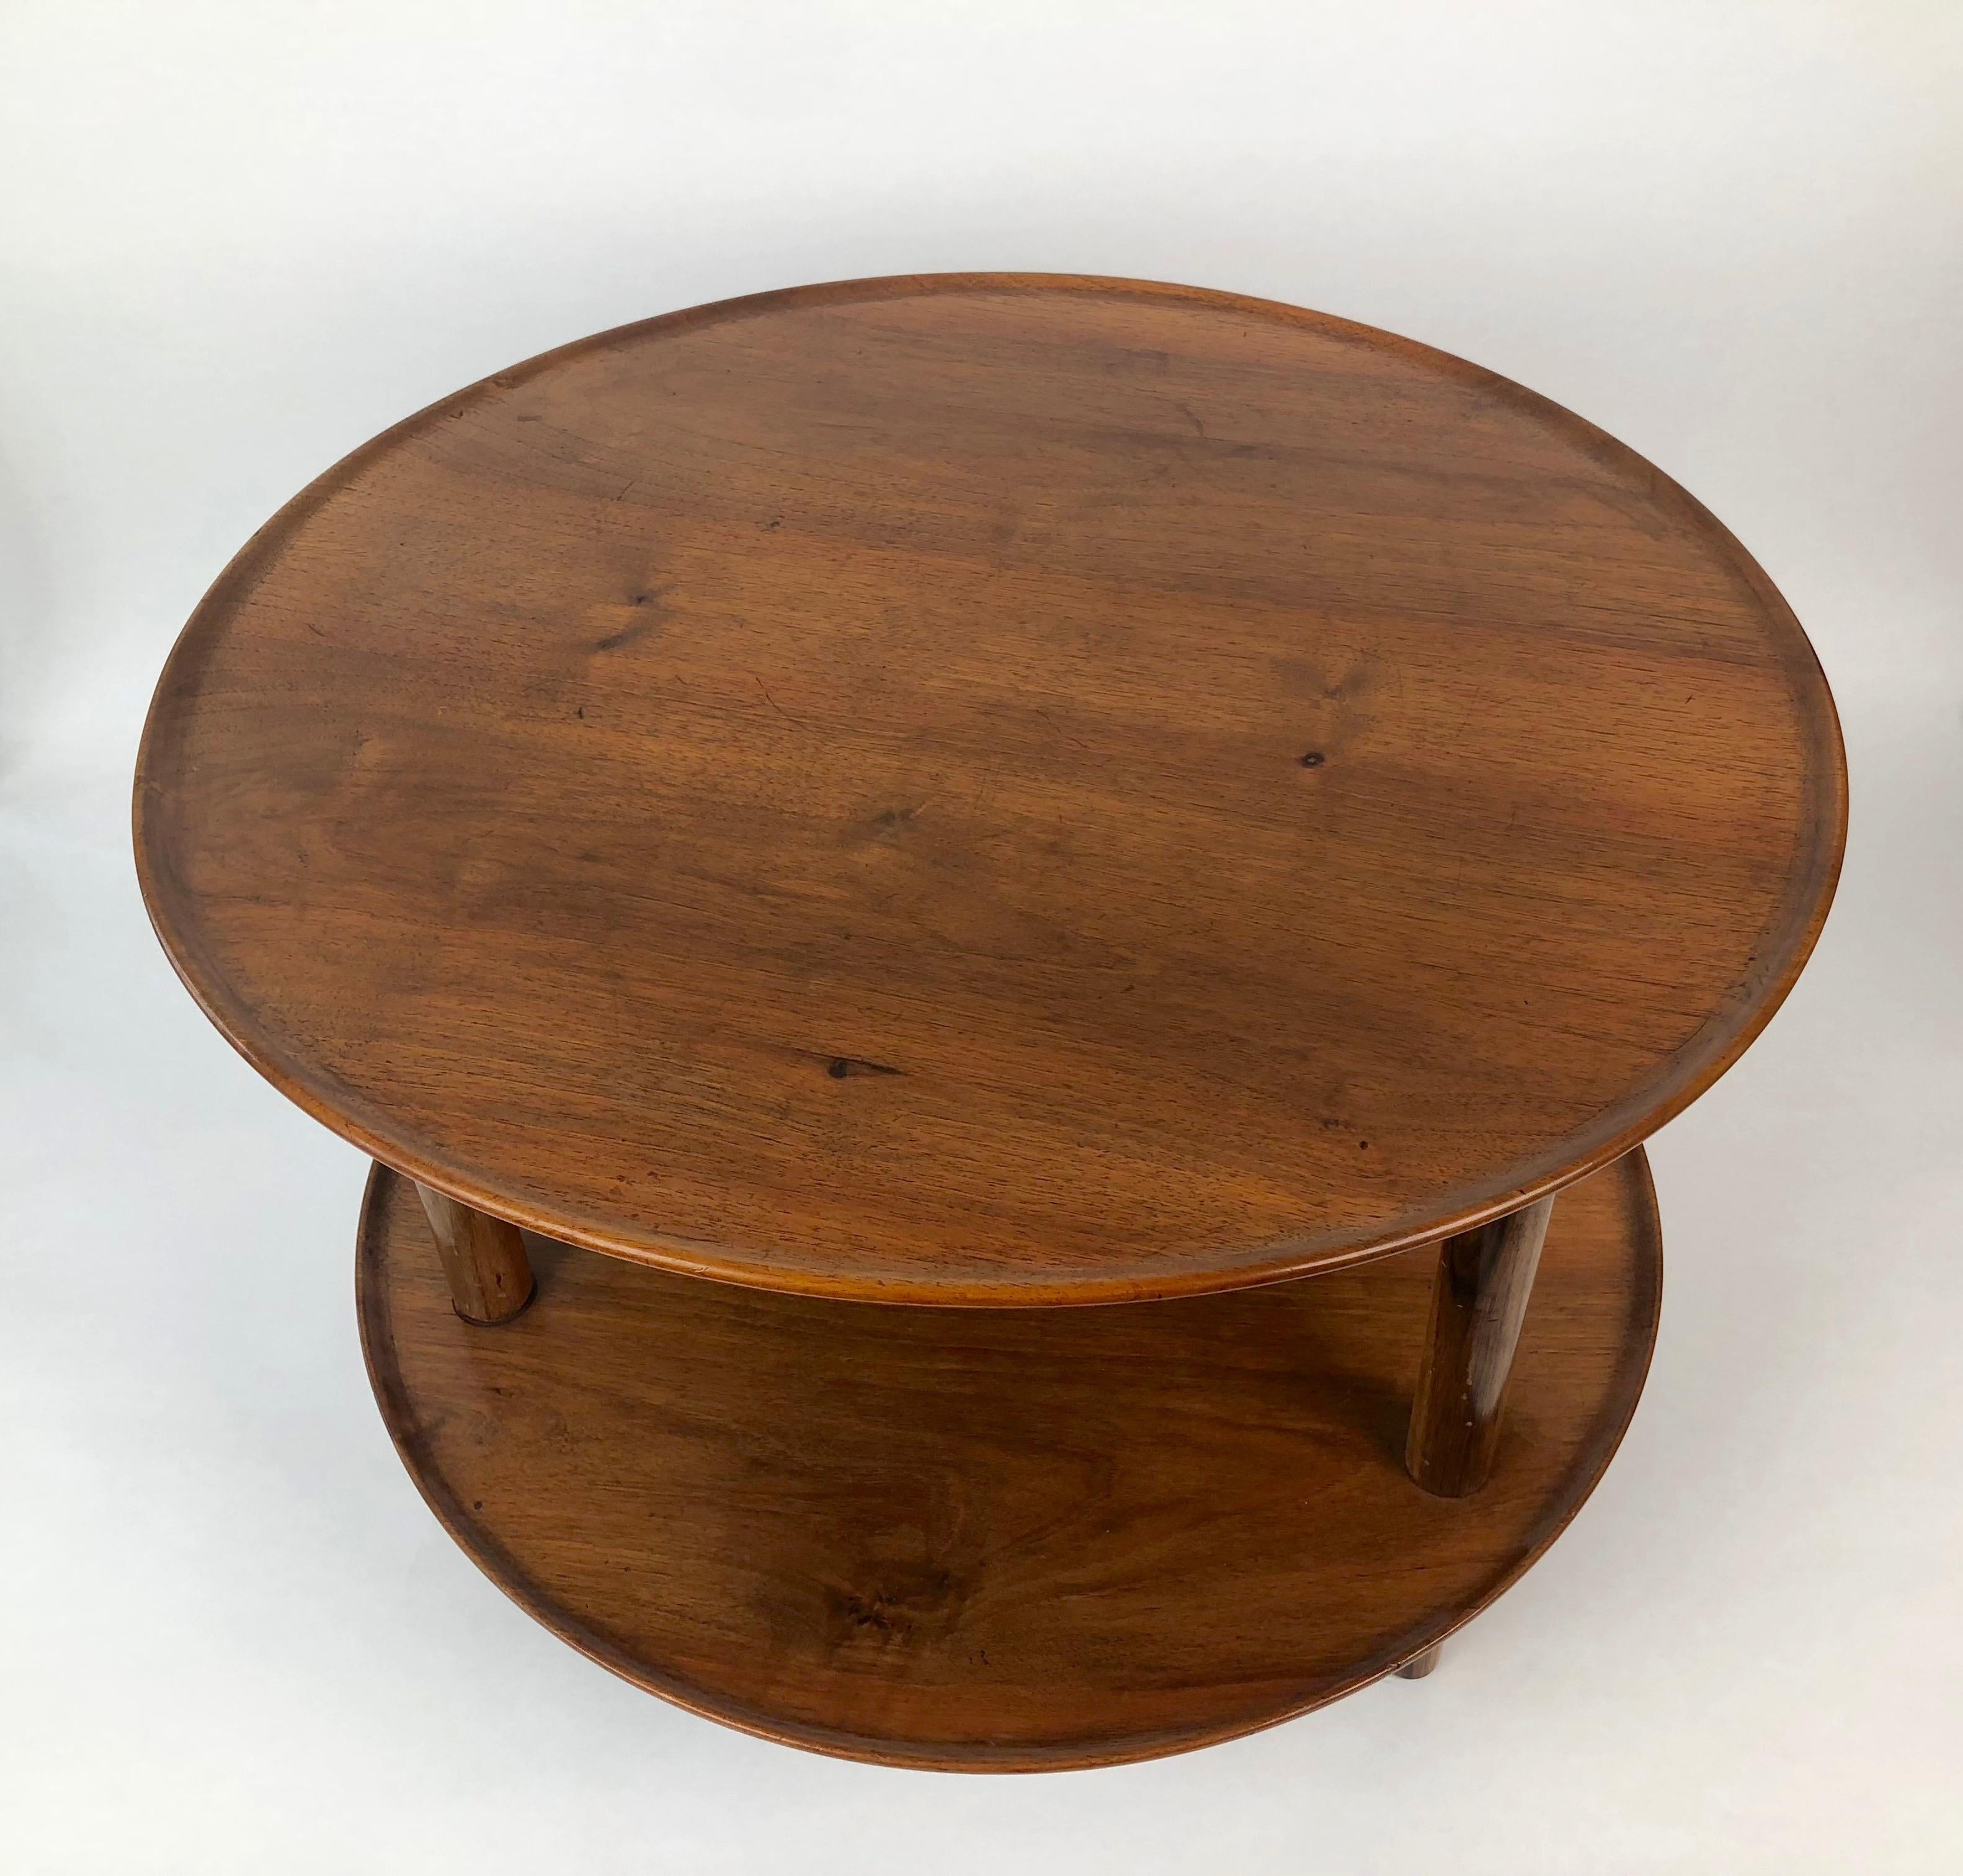 Solid walnut table with two levels designed by Josef Frank in the 1930s.
It is visually beautiful and touching it with the hand one feels the subtleness of craftsmanship.
Table is in original, very good condition.